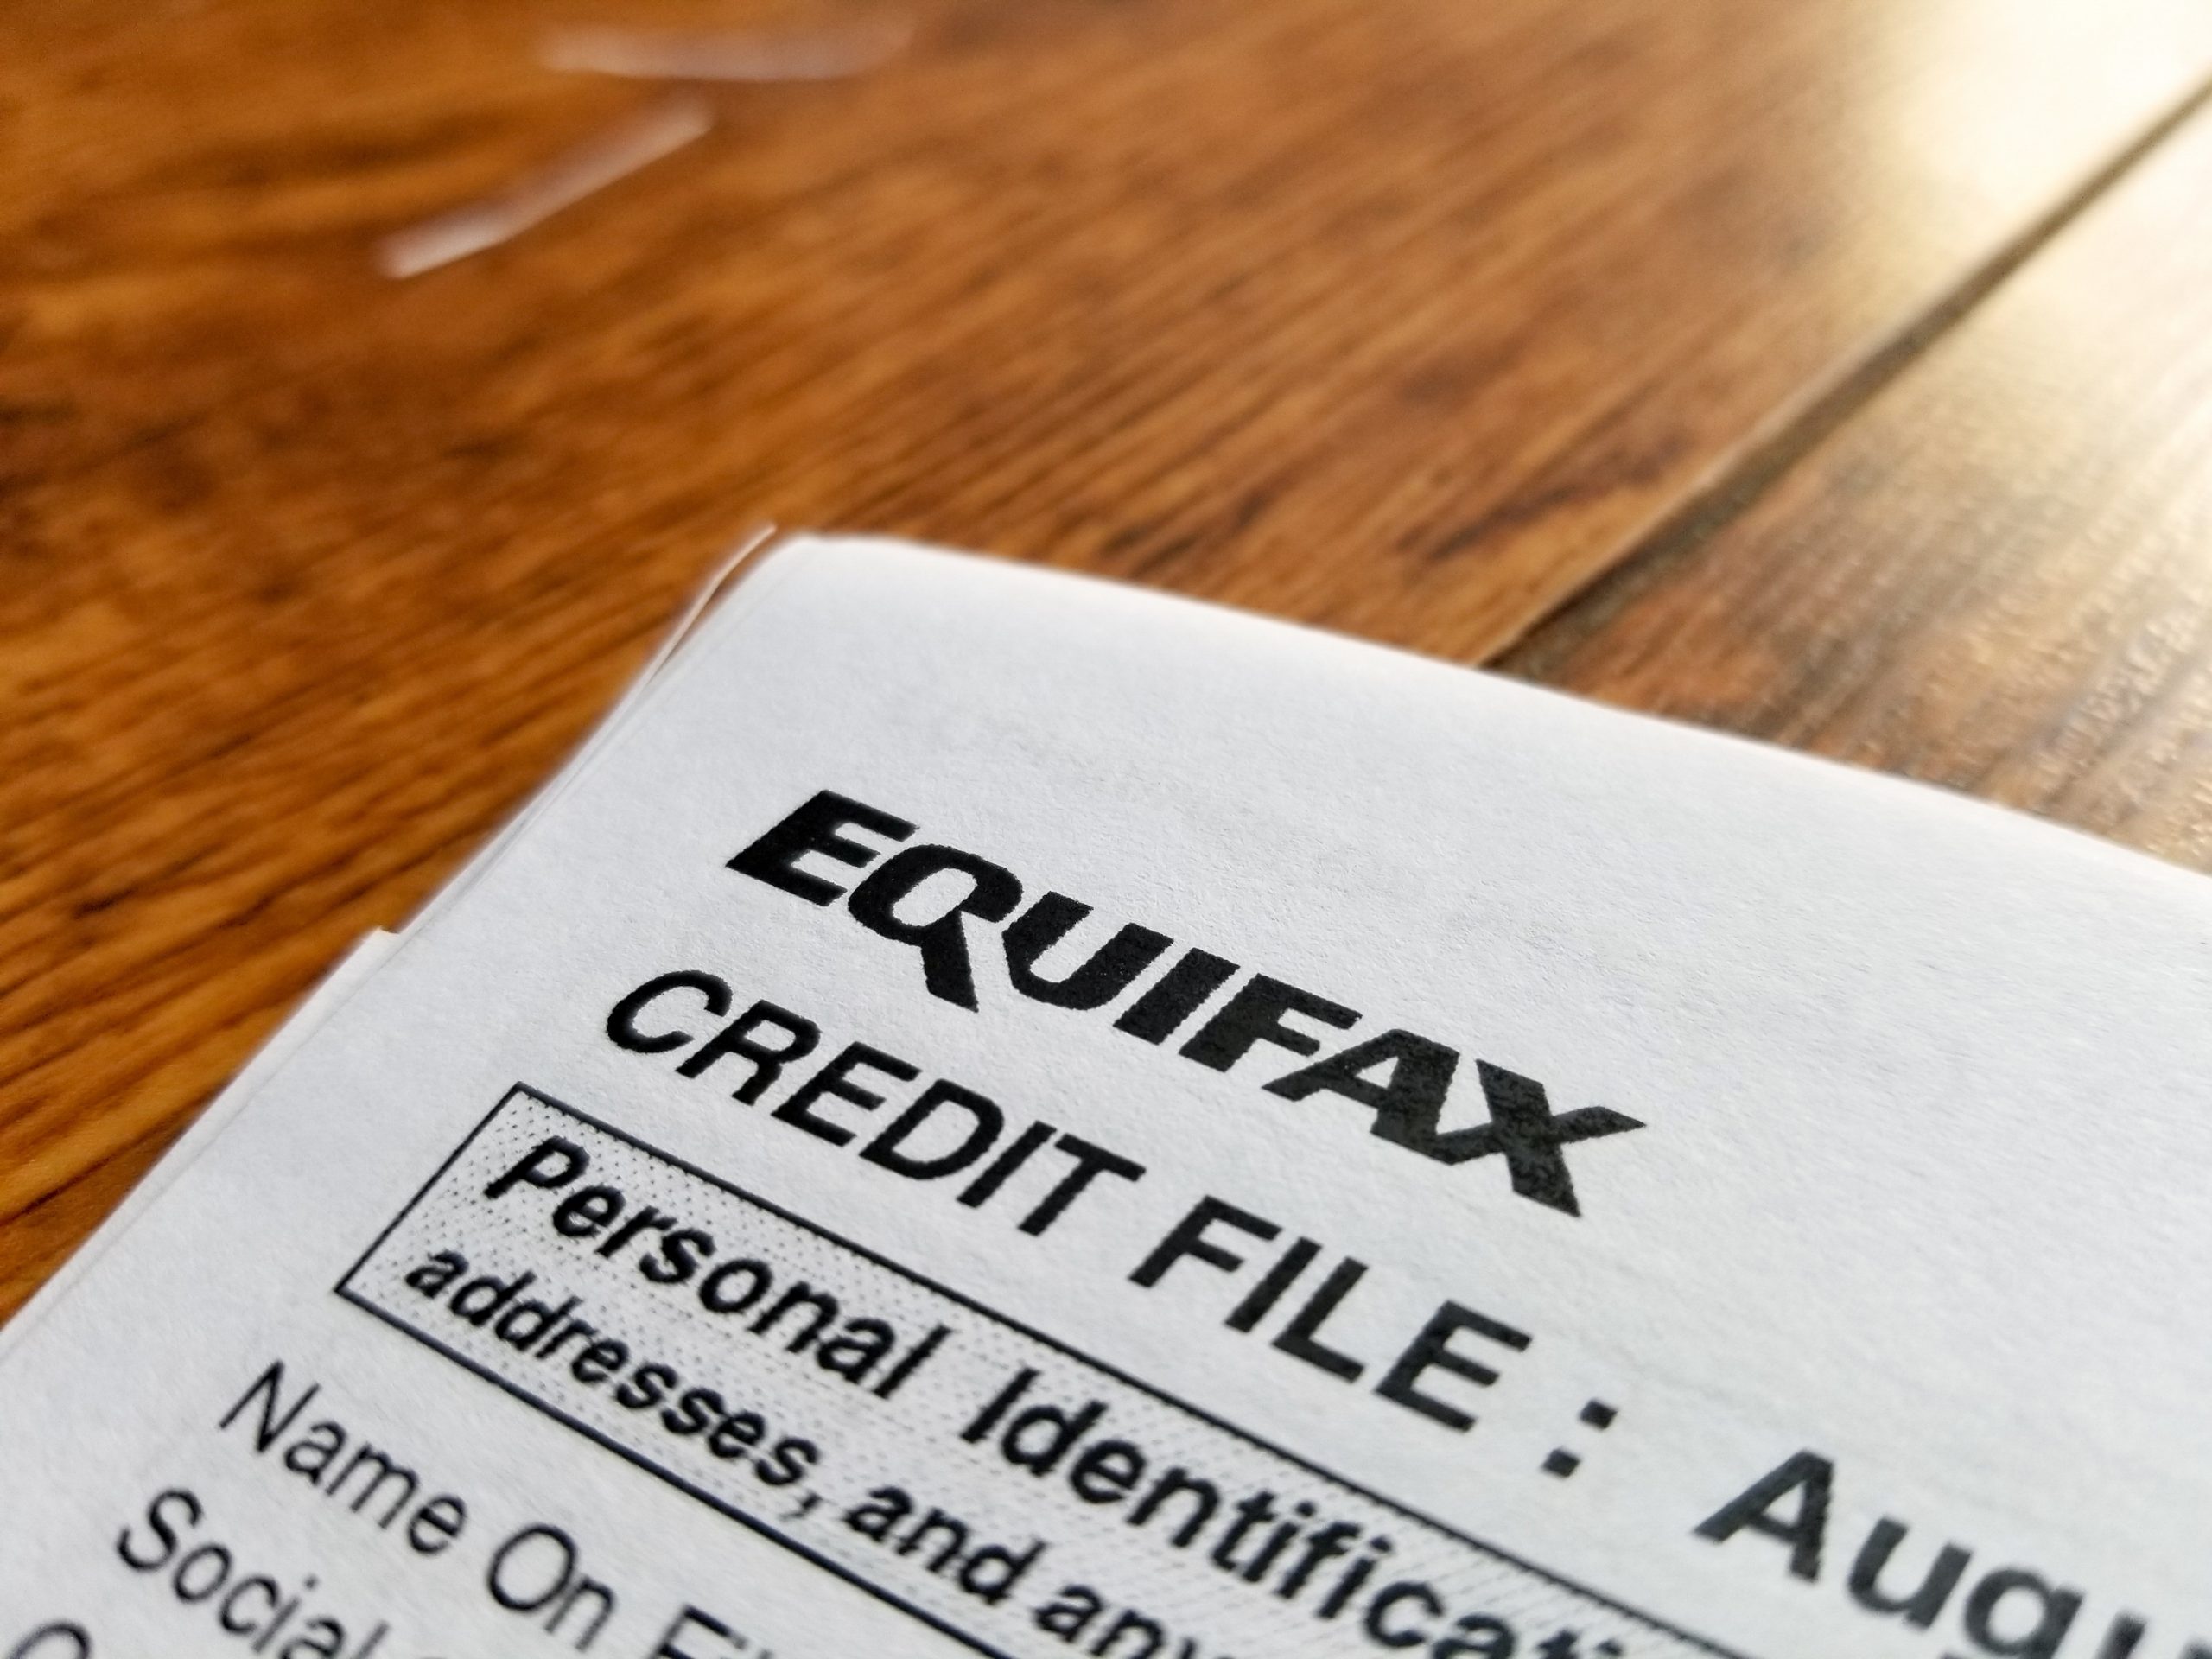 the corner of an equifax credit report